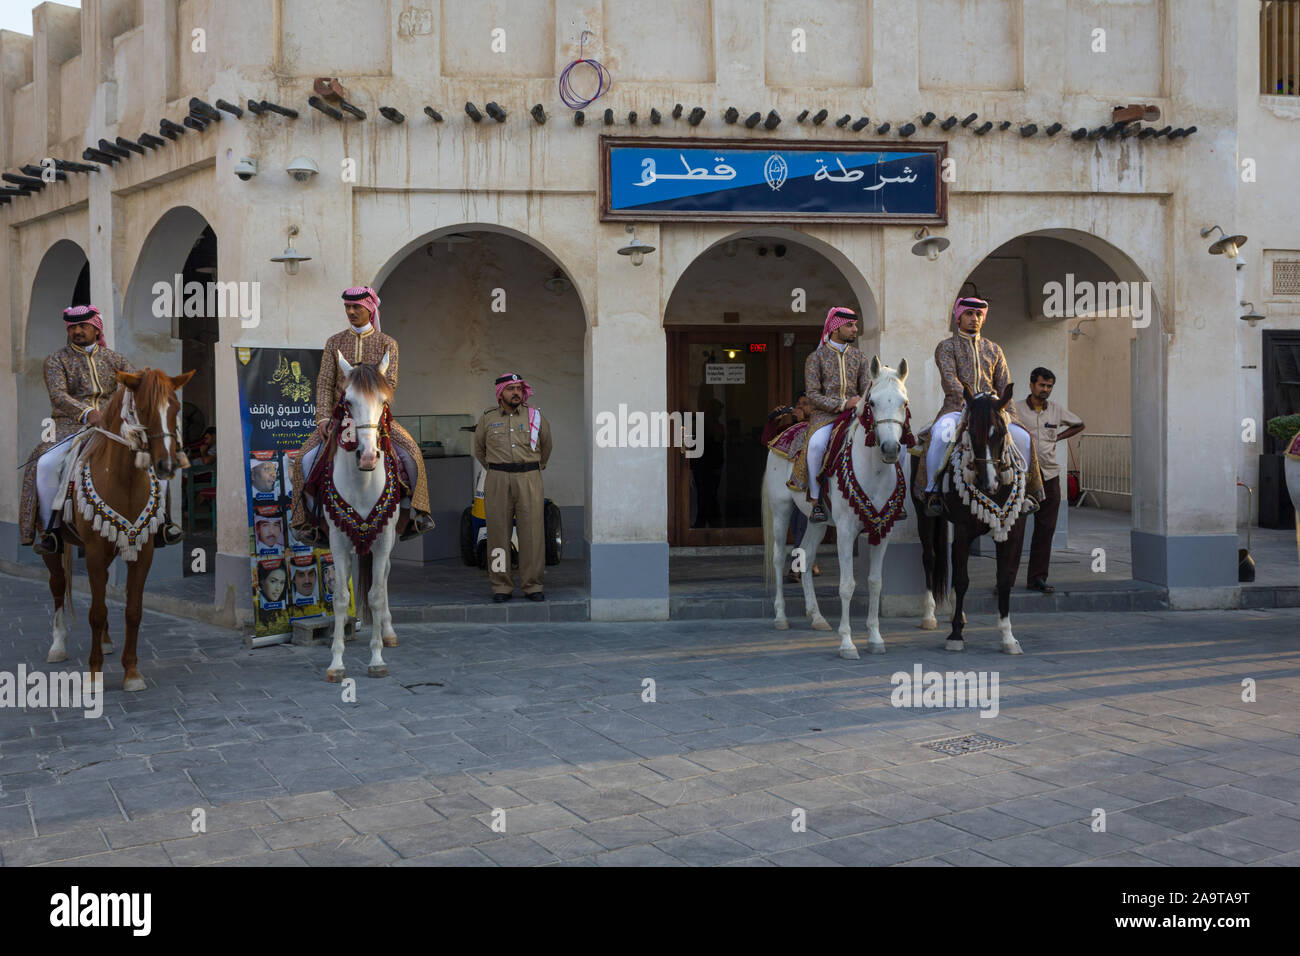 Doha-Qatar,January 24,2013: Old police station in Souk Waqif Doha Qatar daylight view with traditional guards riding horses in front of it Stock Photo